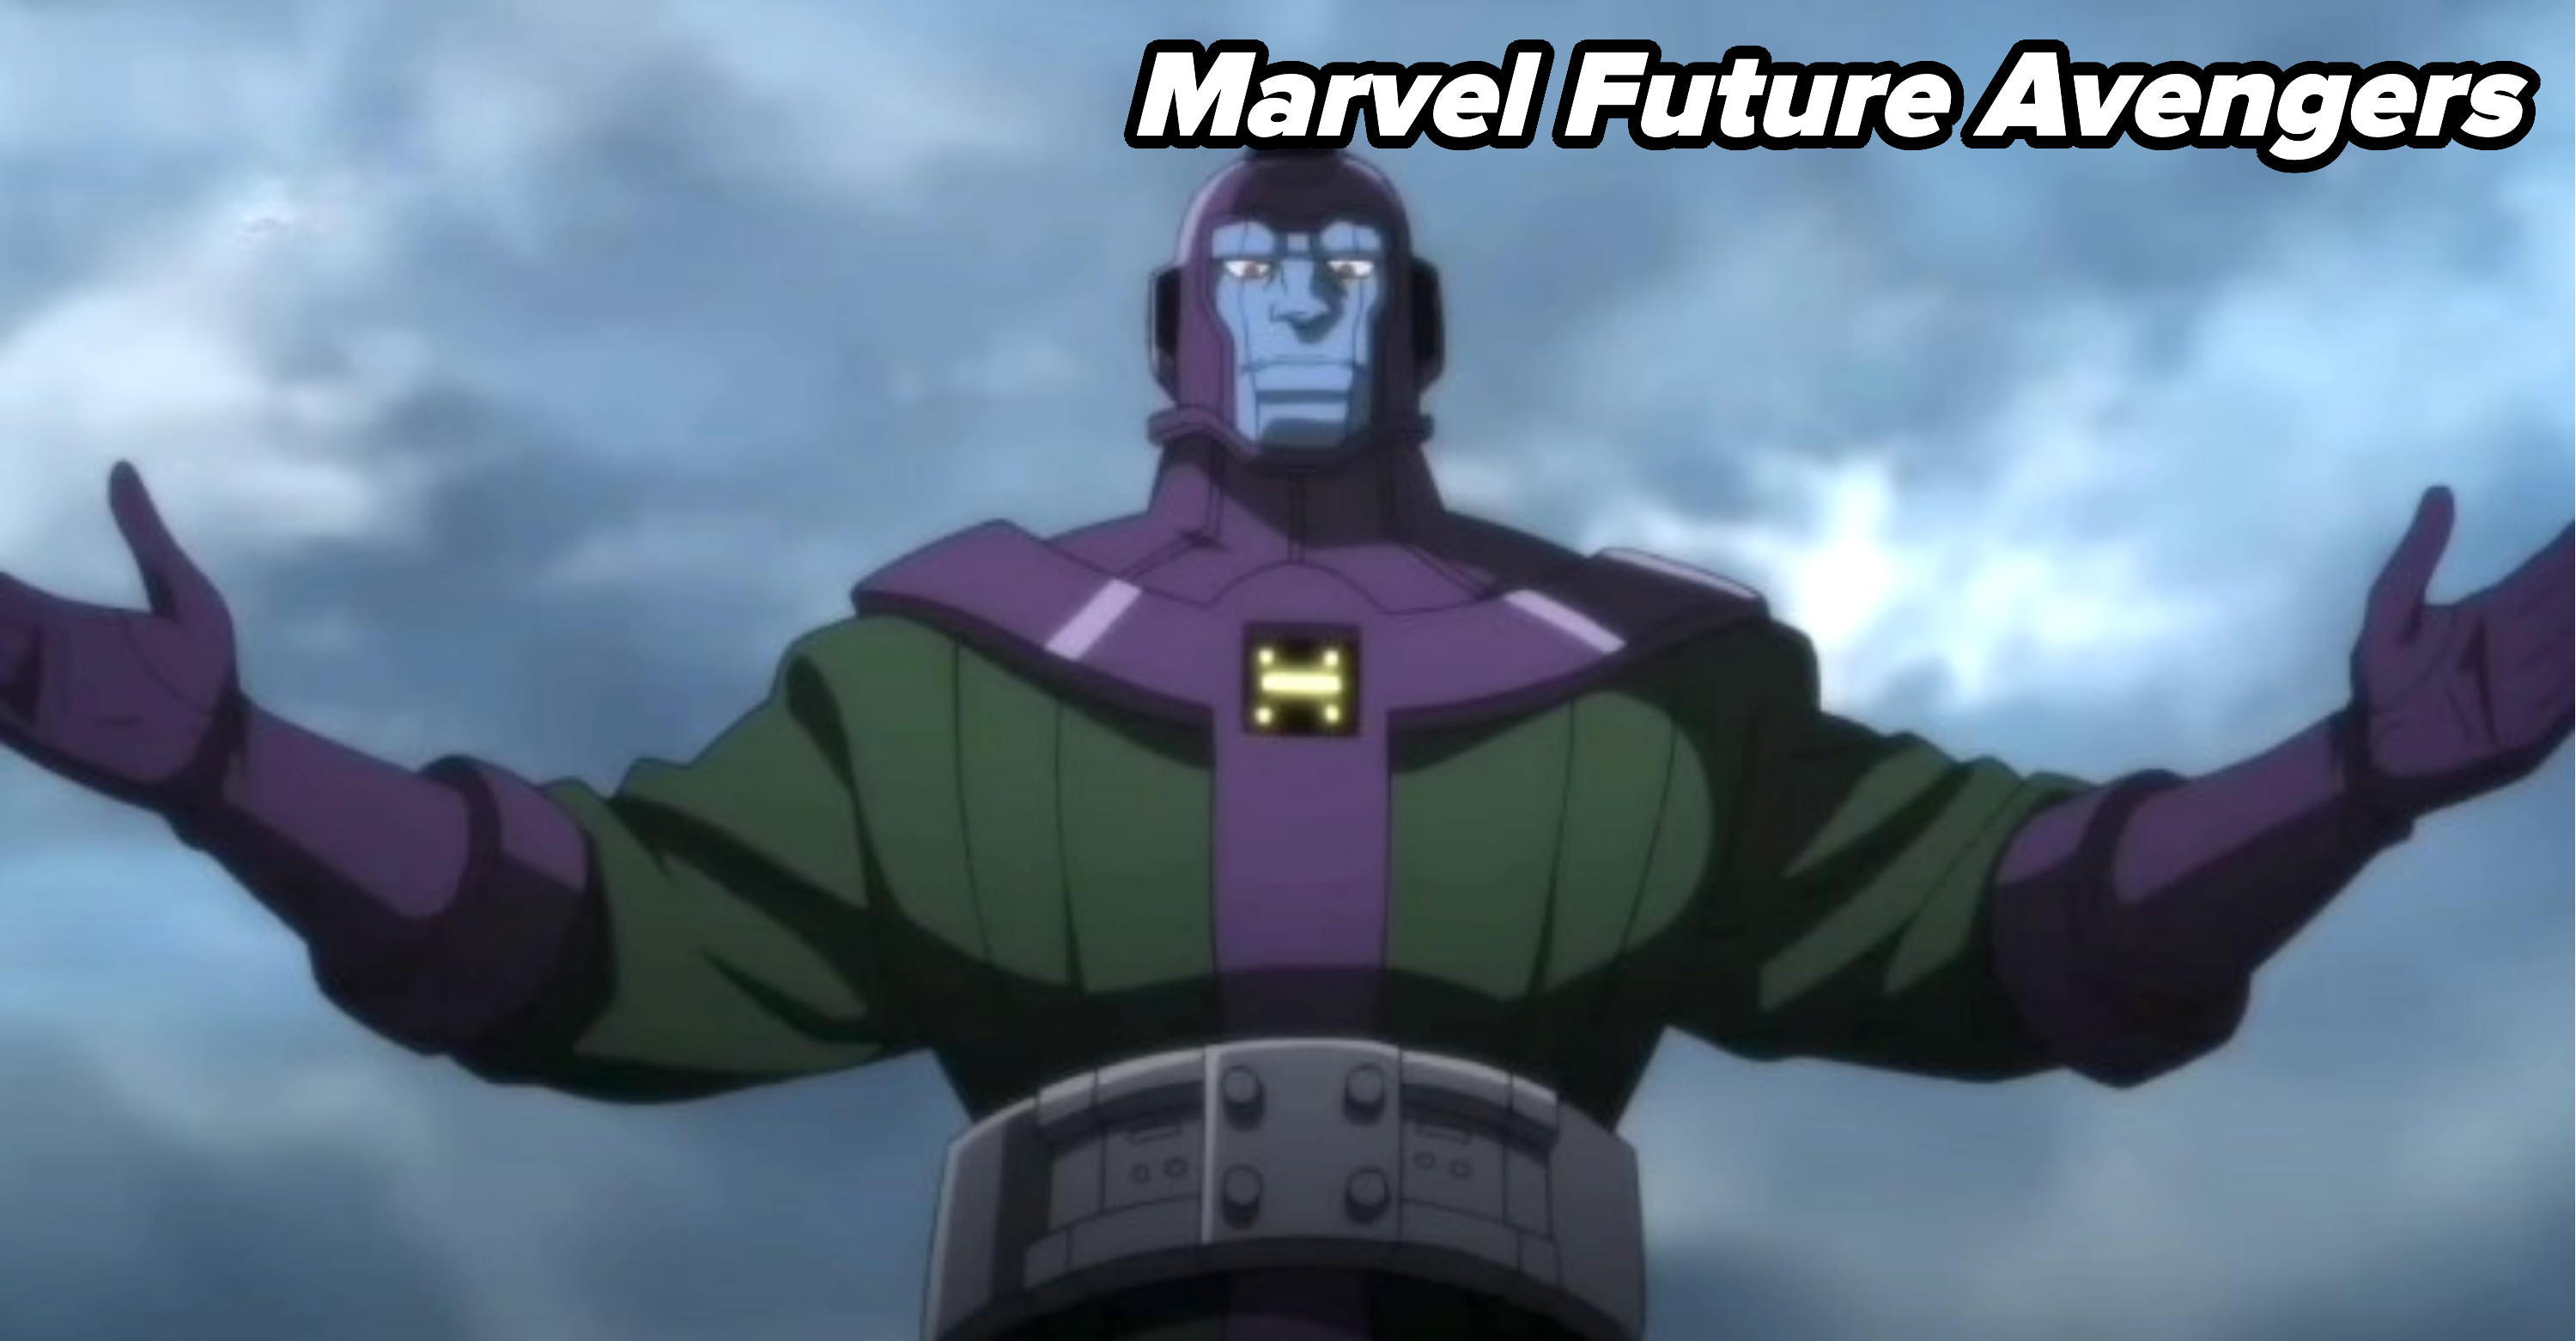 &quot;Marvel Future Avengers&quot; over the illustration version of Kang